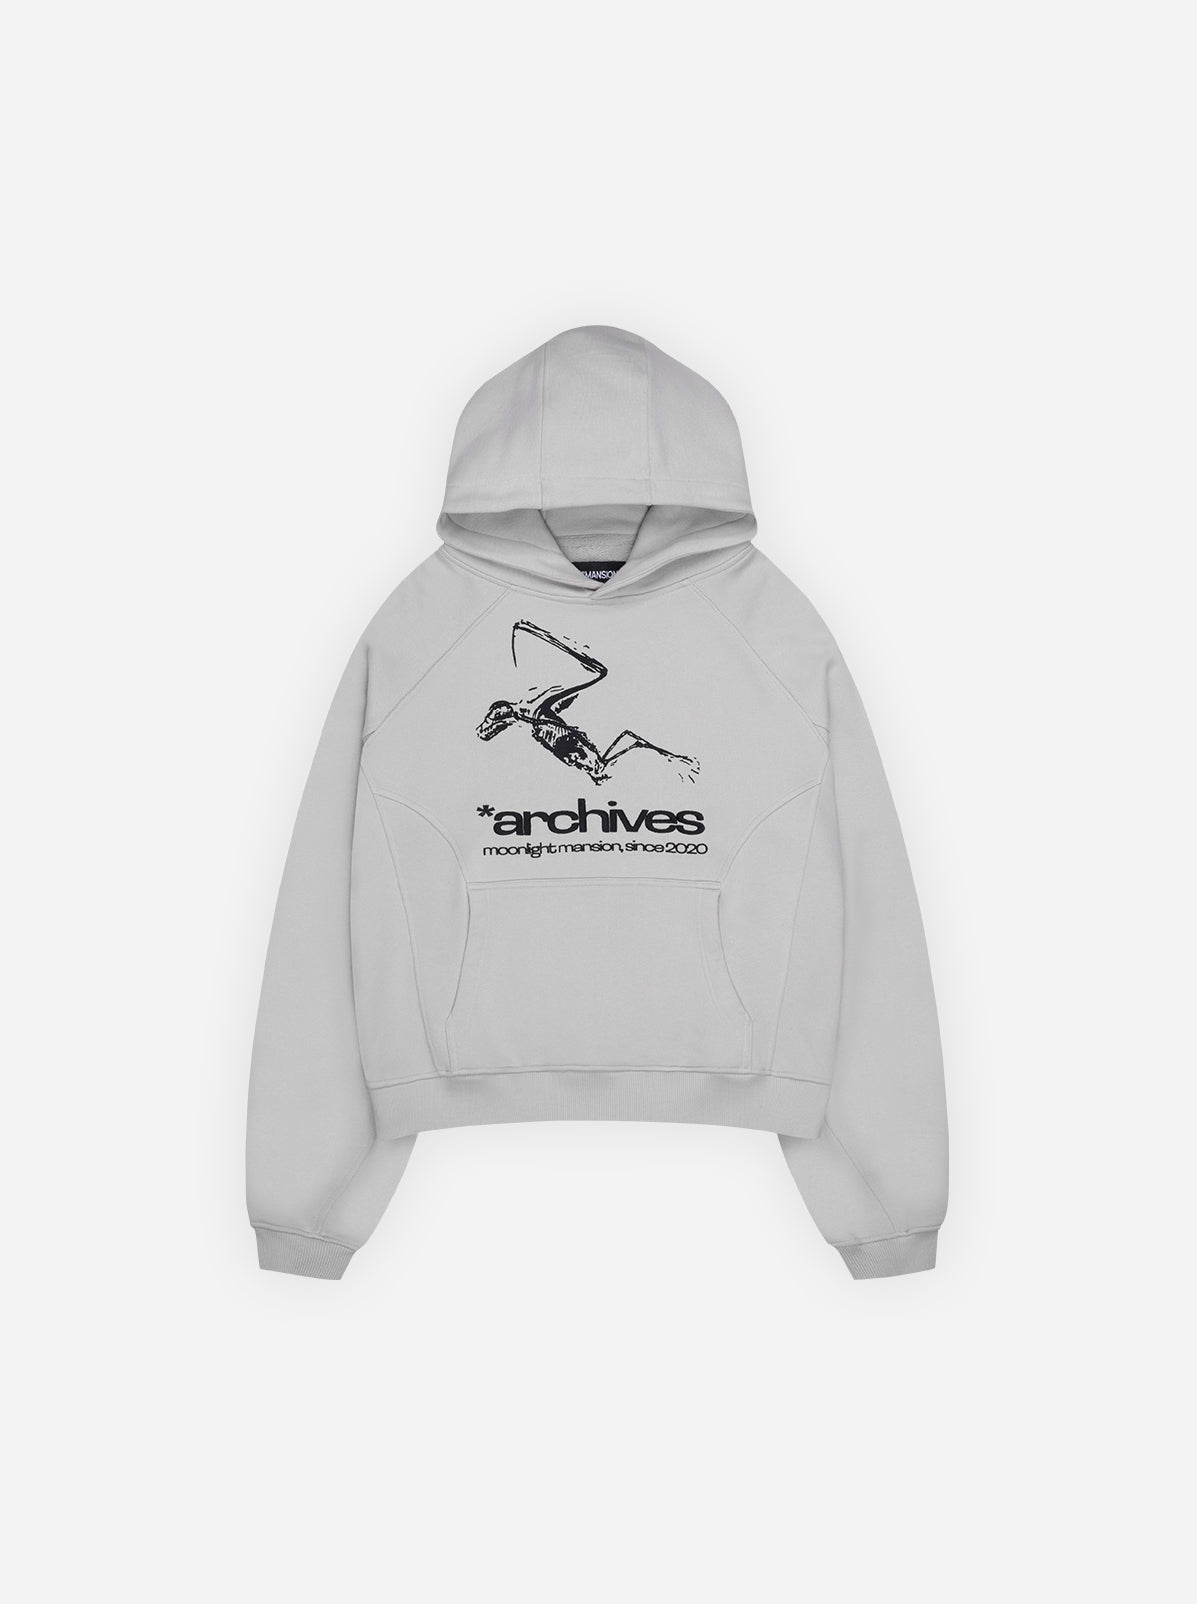 ARCHIVES HOODIE- Gray